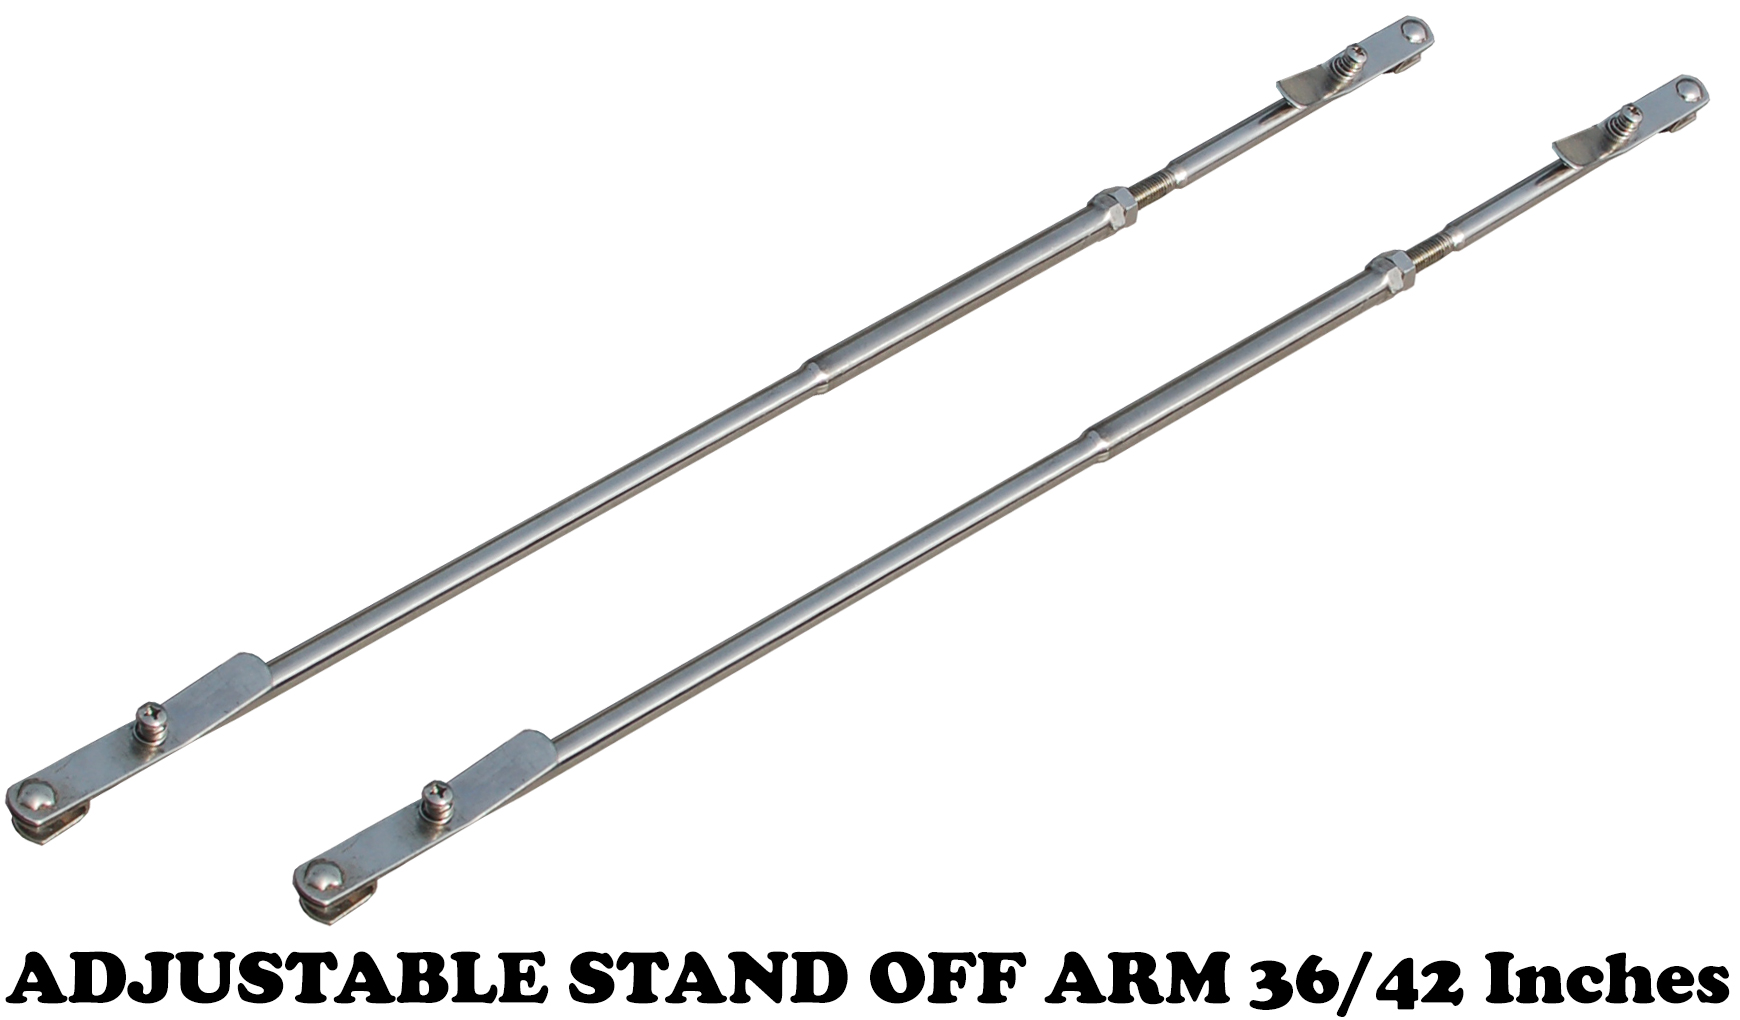 ADJUSTABLE STAND OFF 36/42 